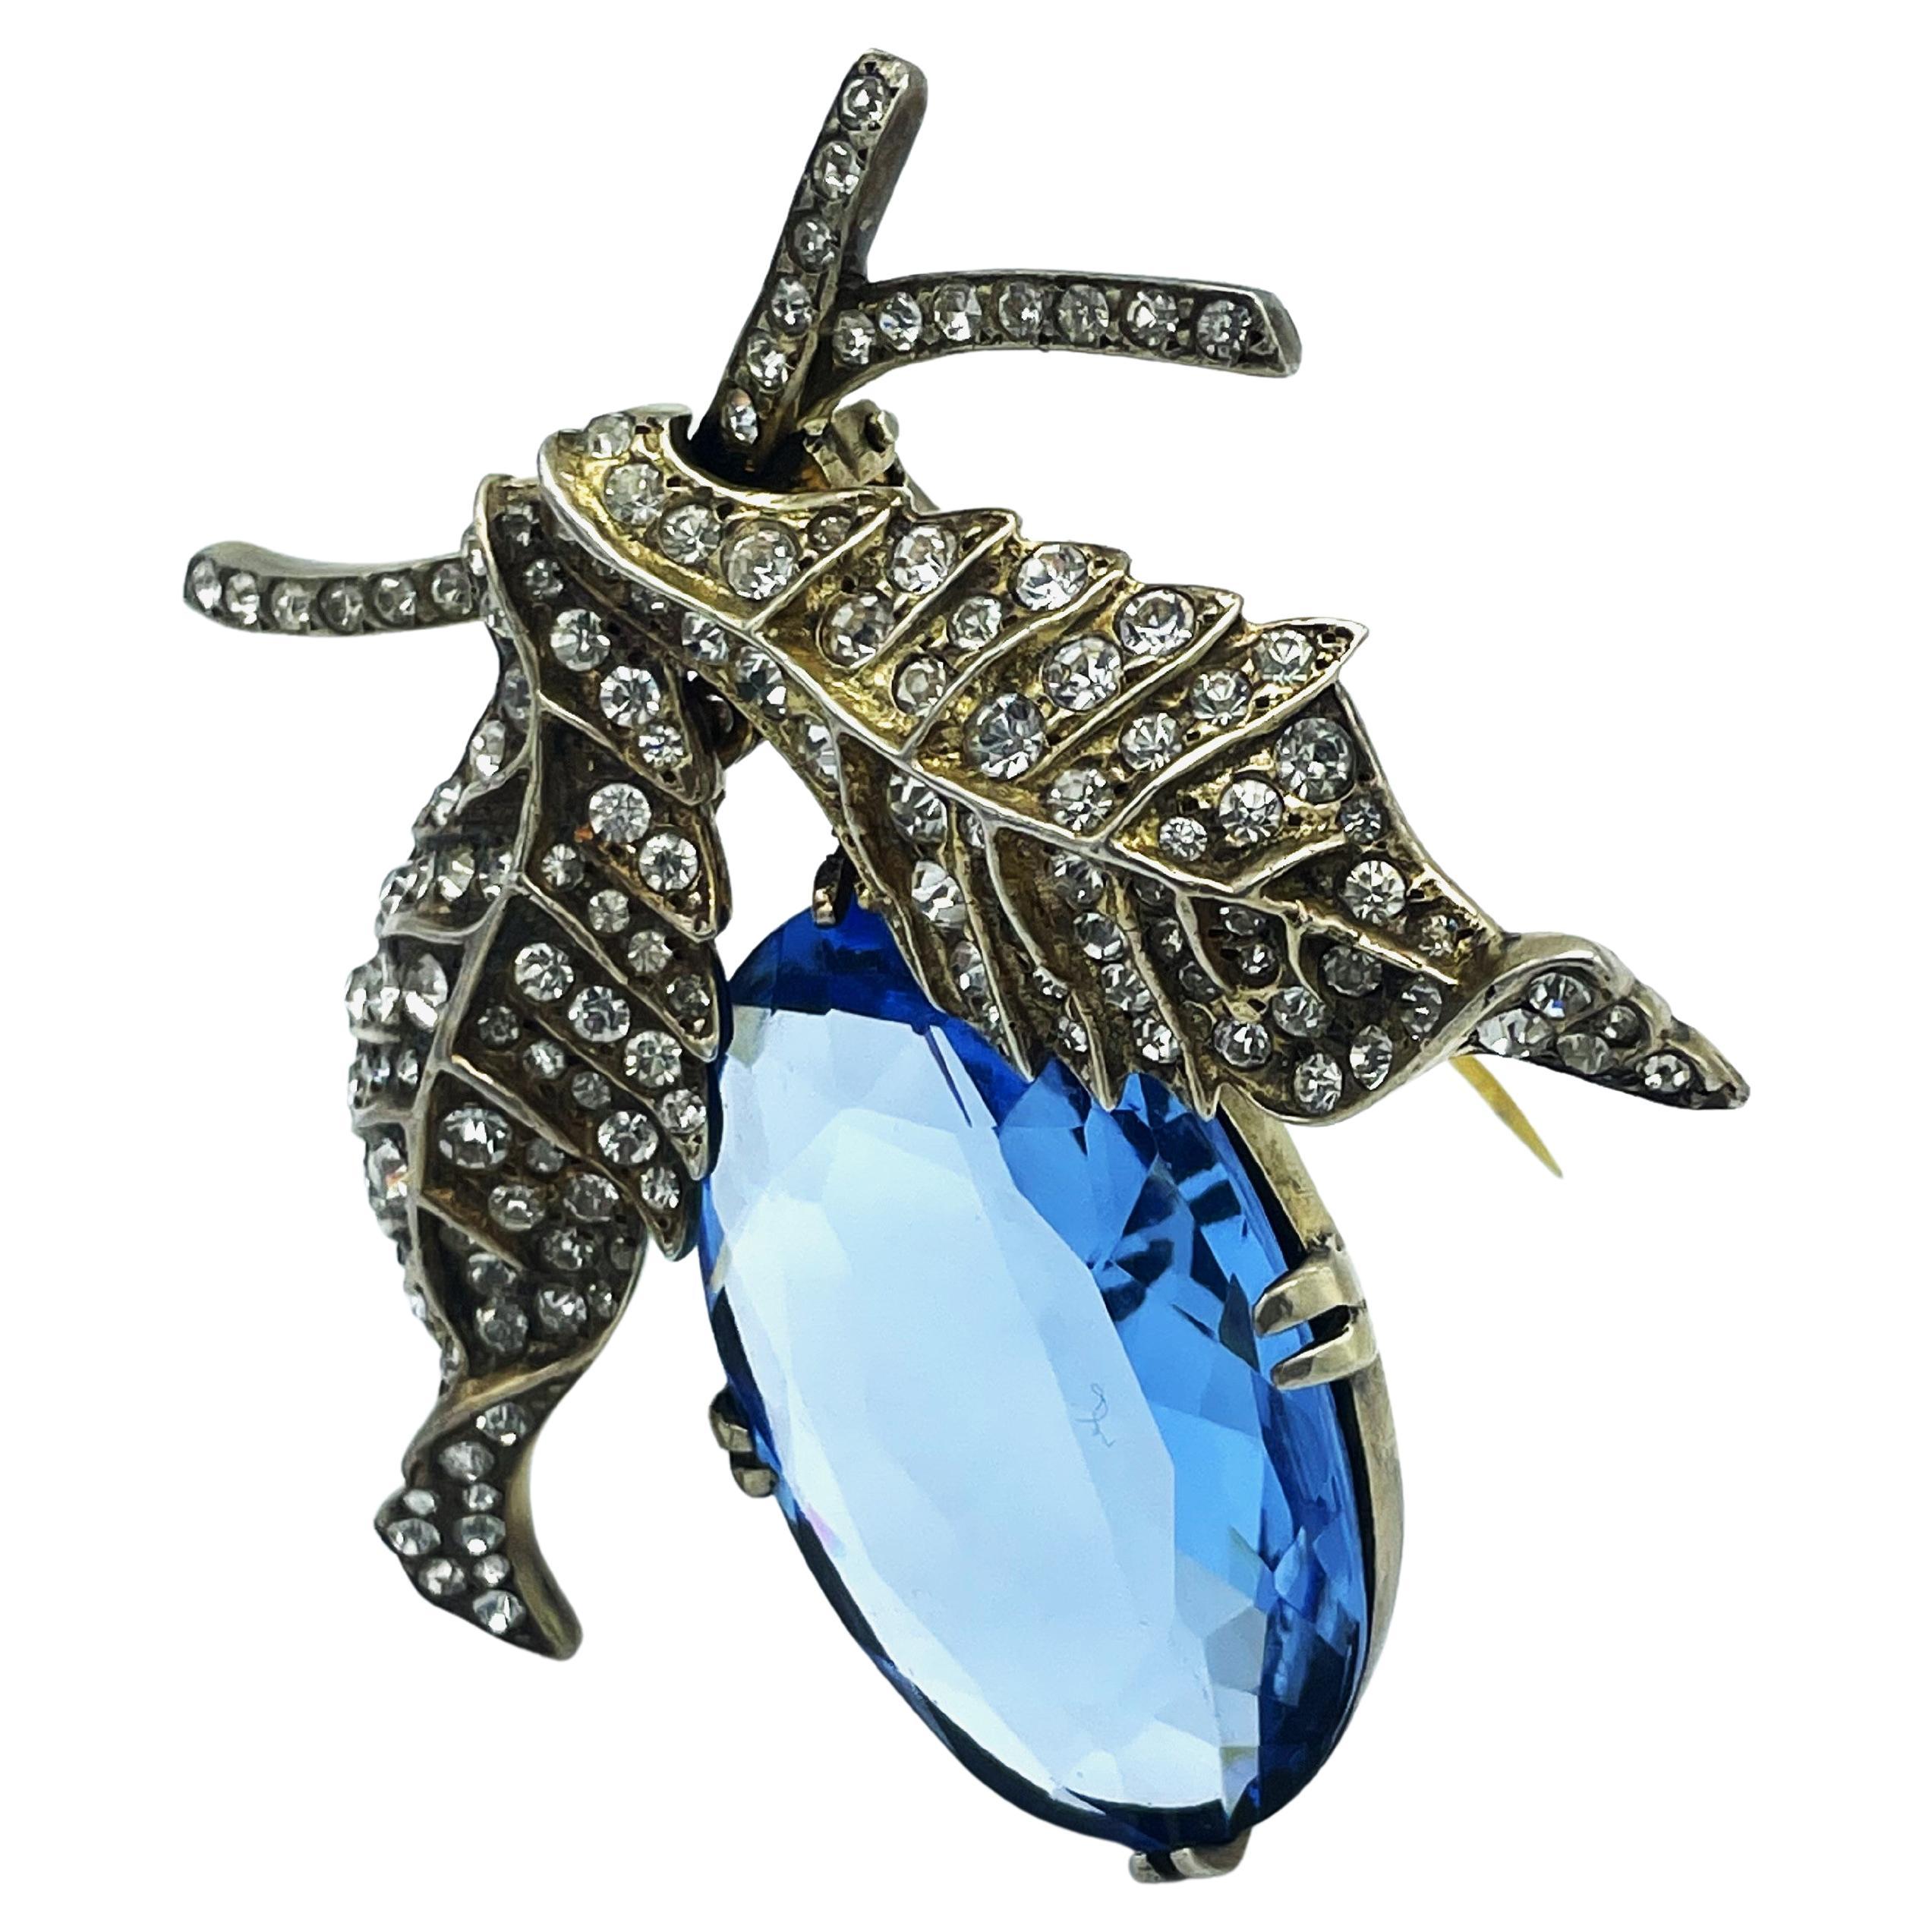 Eisenberg pin in the style of a blue fruit, leaves, sterling gold plated, 1940s  For Sale